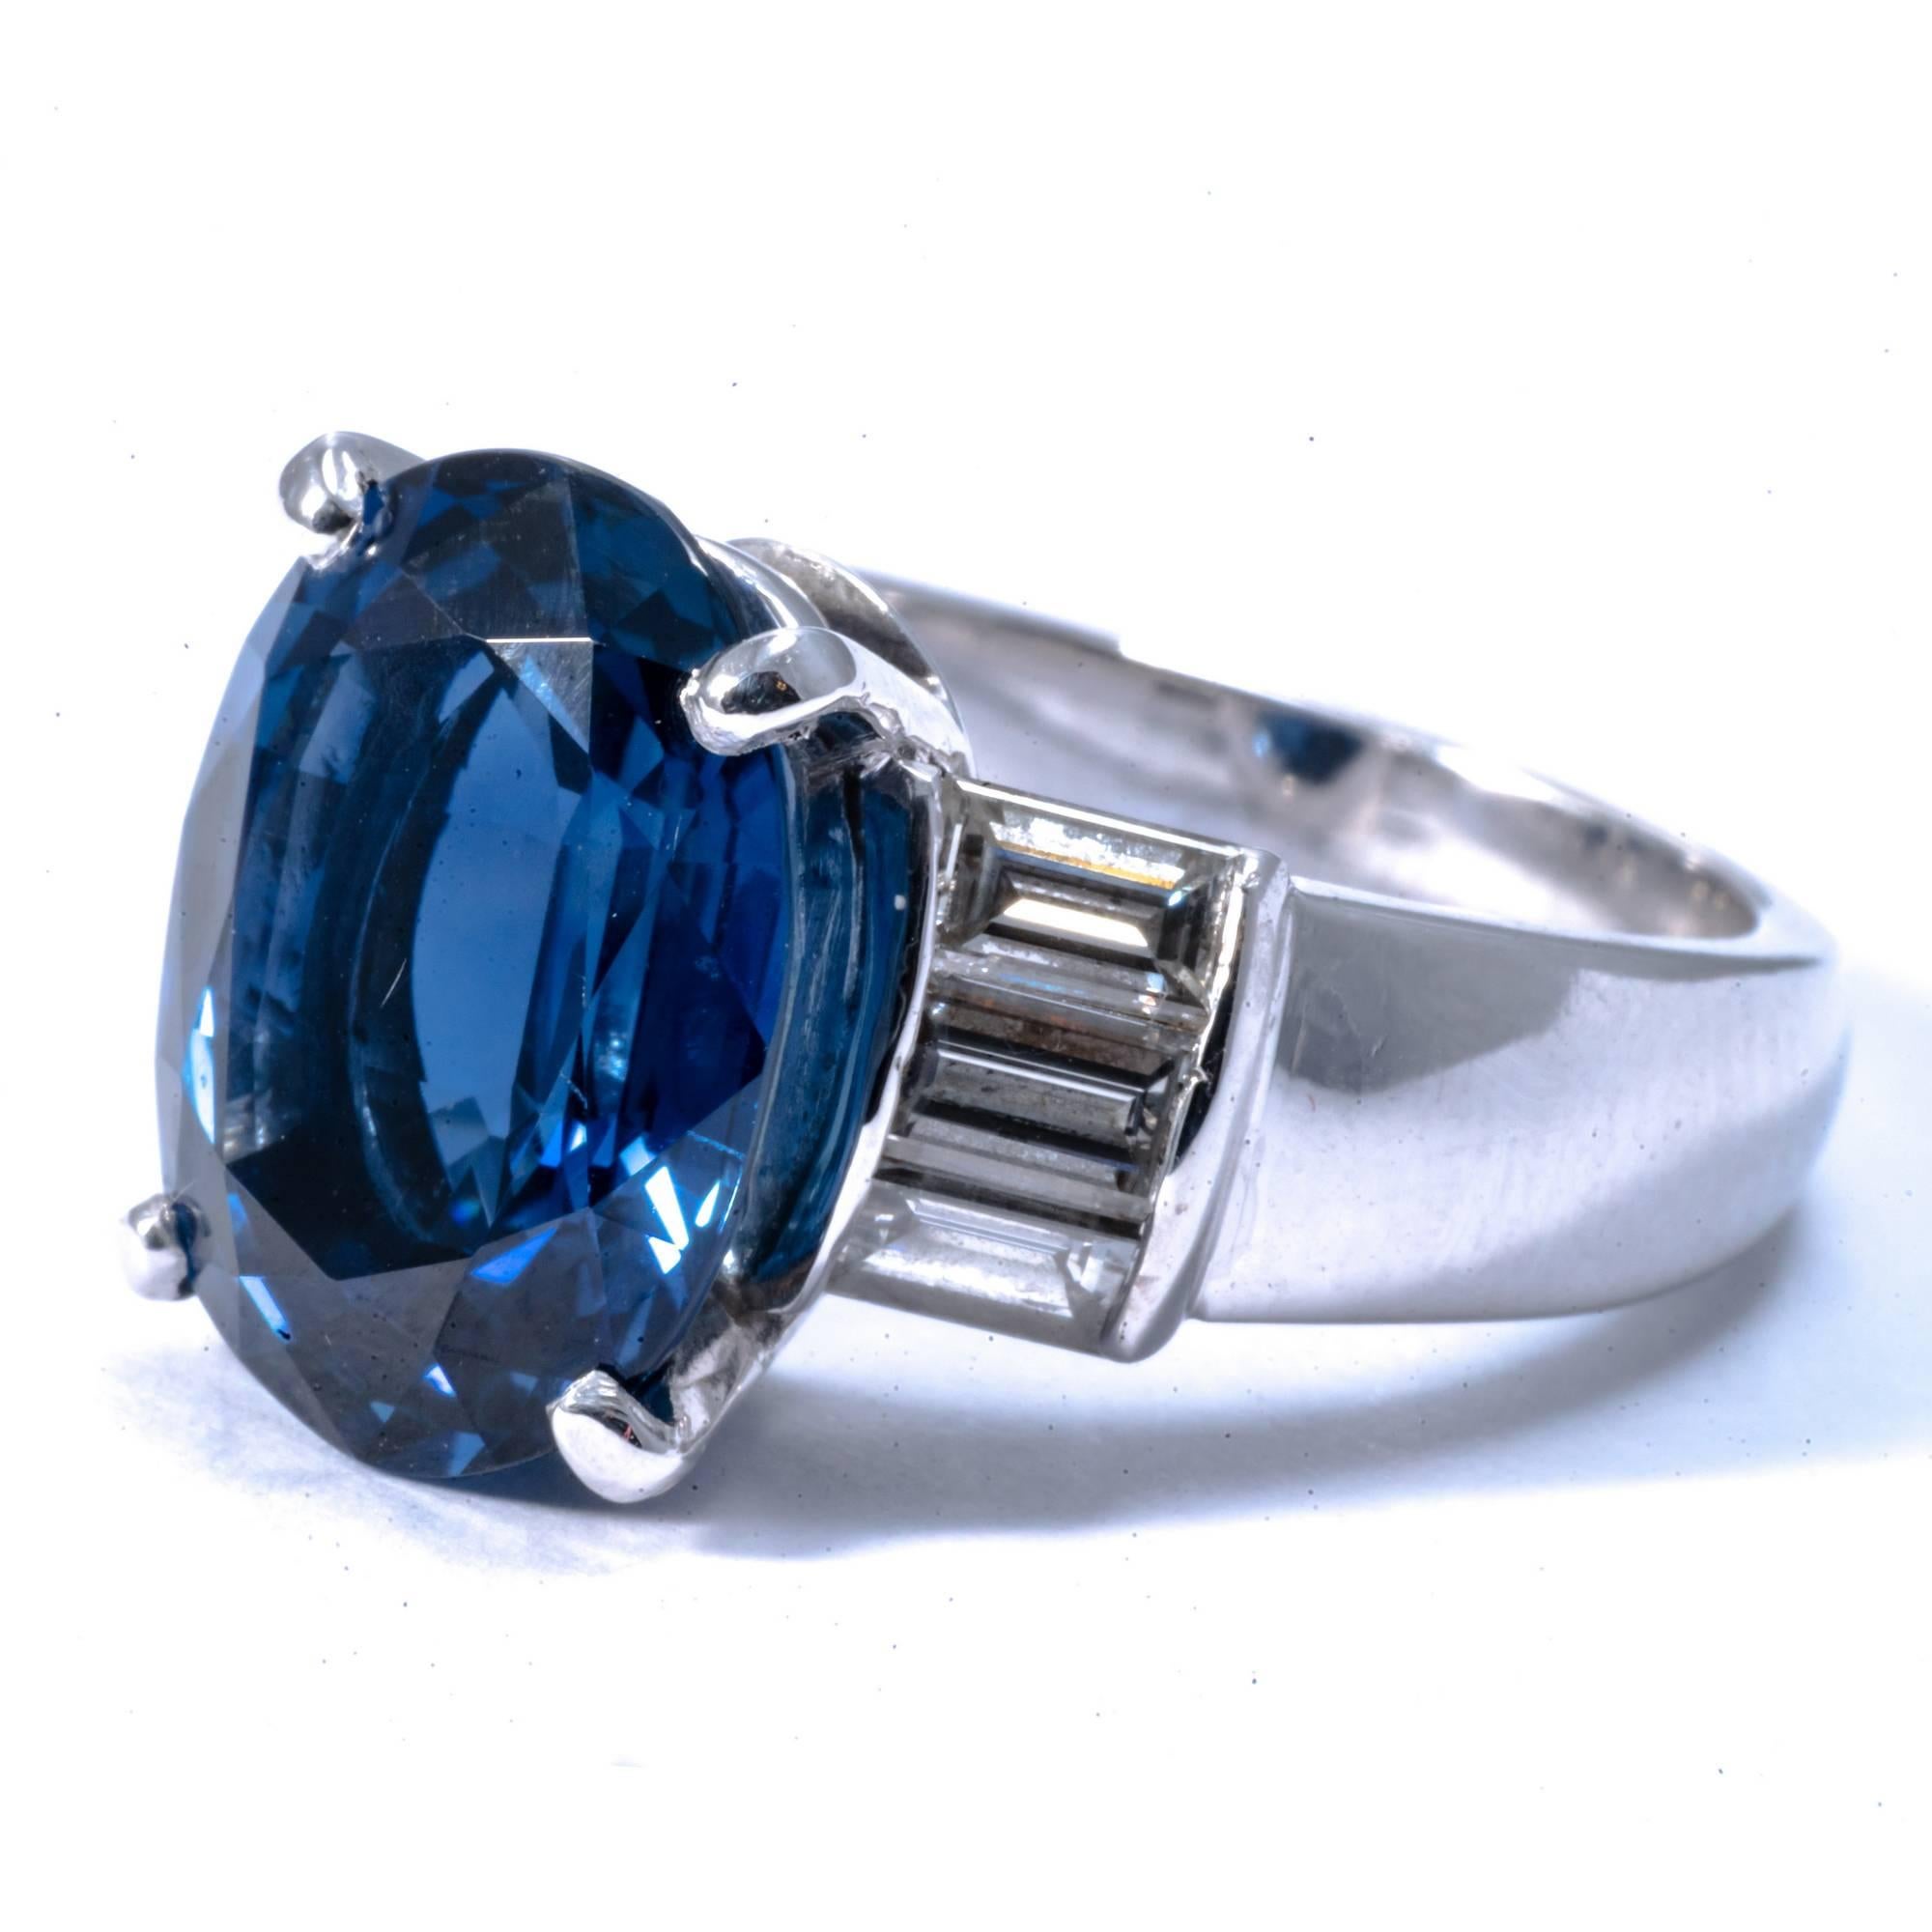 Oval Cut Certified Not Treated  9.80 Carat Sapphire Diamond Platinum Statement Ring Band For Sale